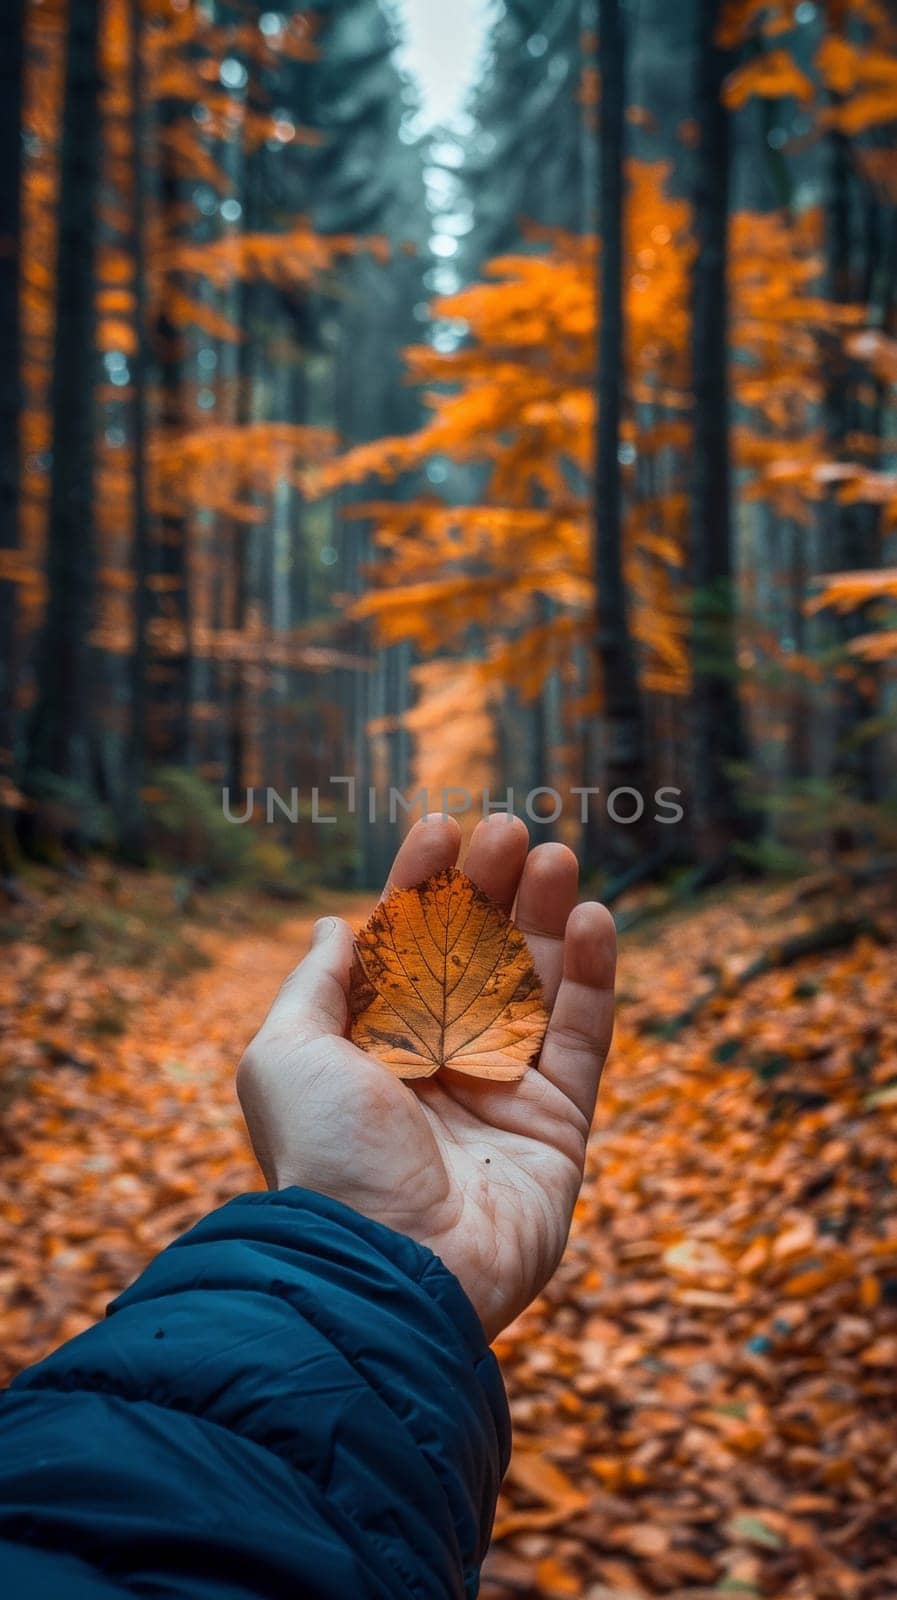 A person holding a leaf in their hand with trees behind them, AI by starush